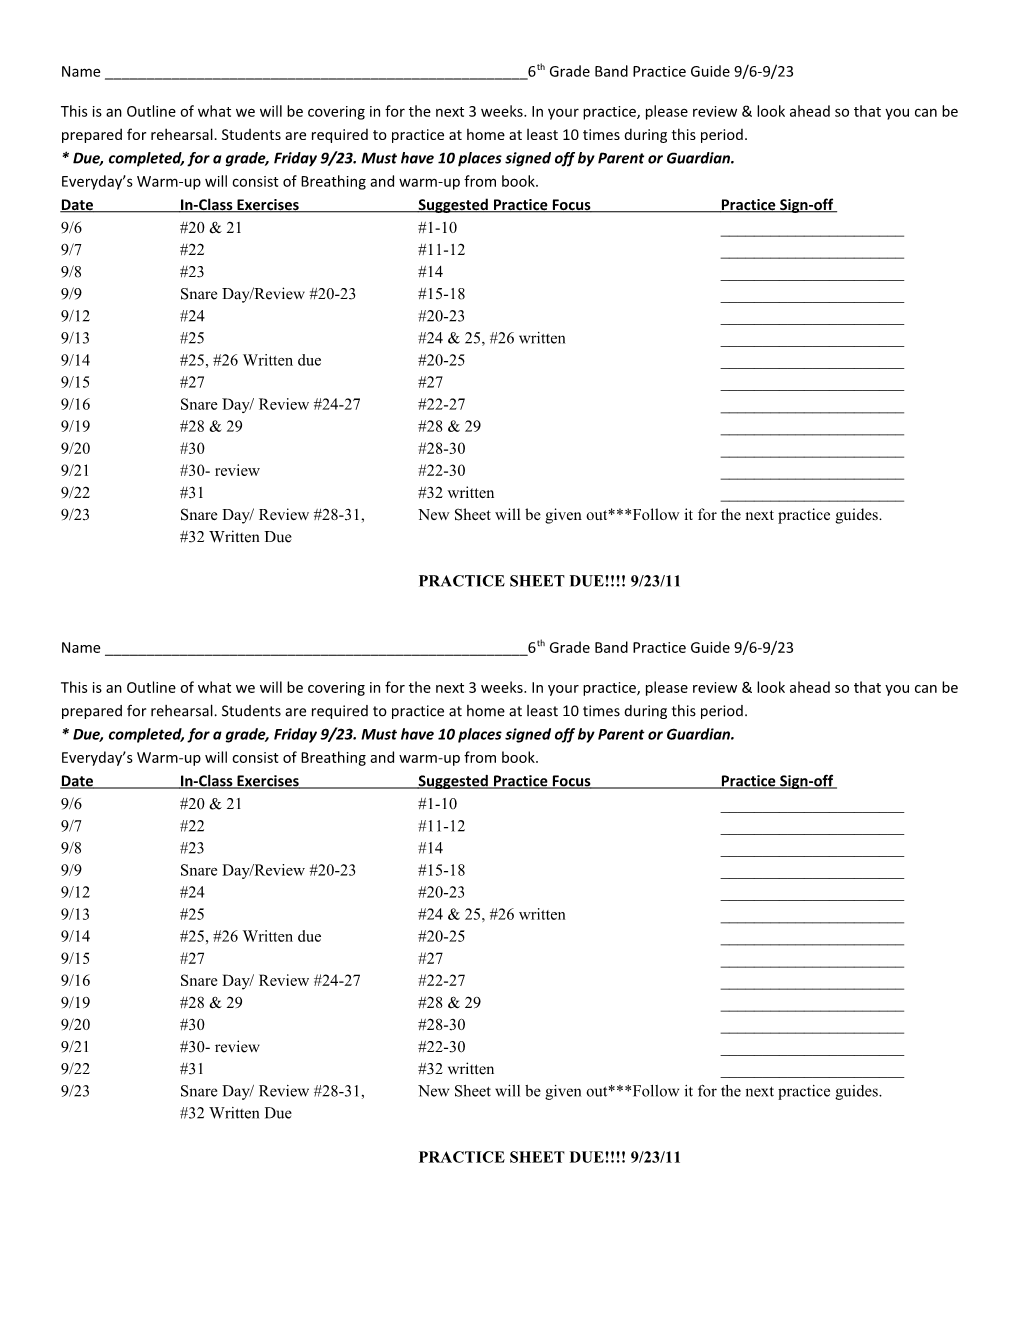 Name ______7Th Grade Band Practice Guide 2/19- 3/14 s1